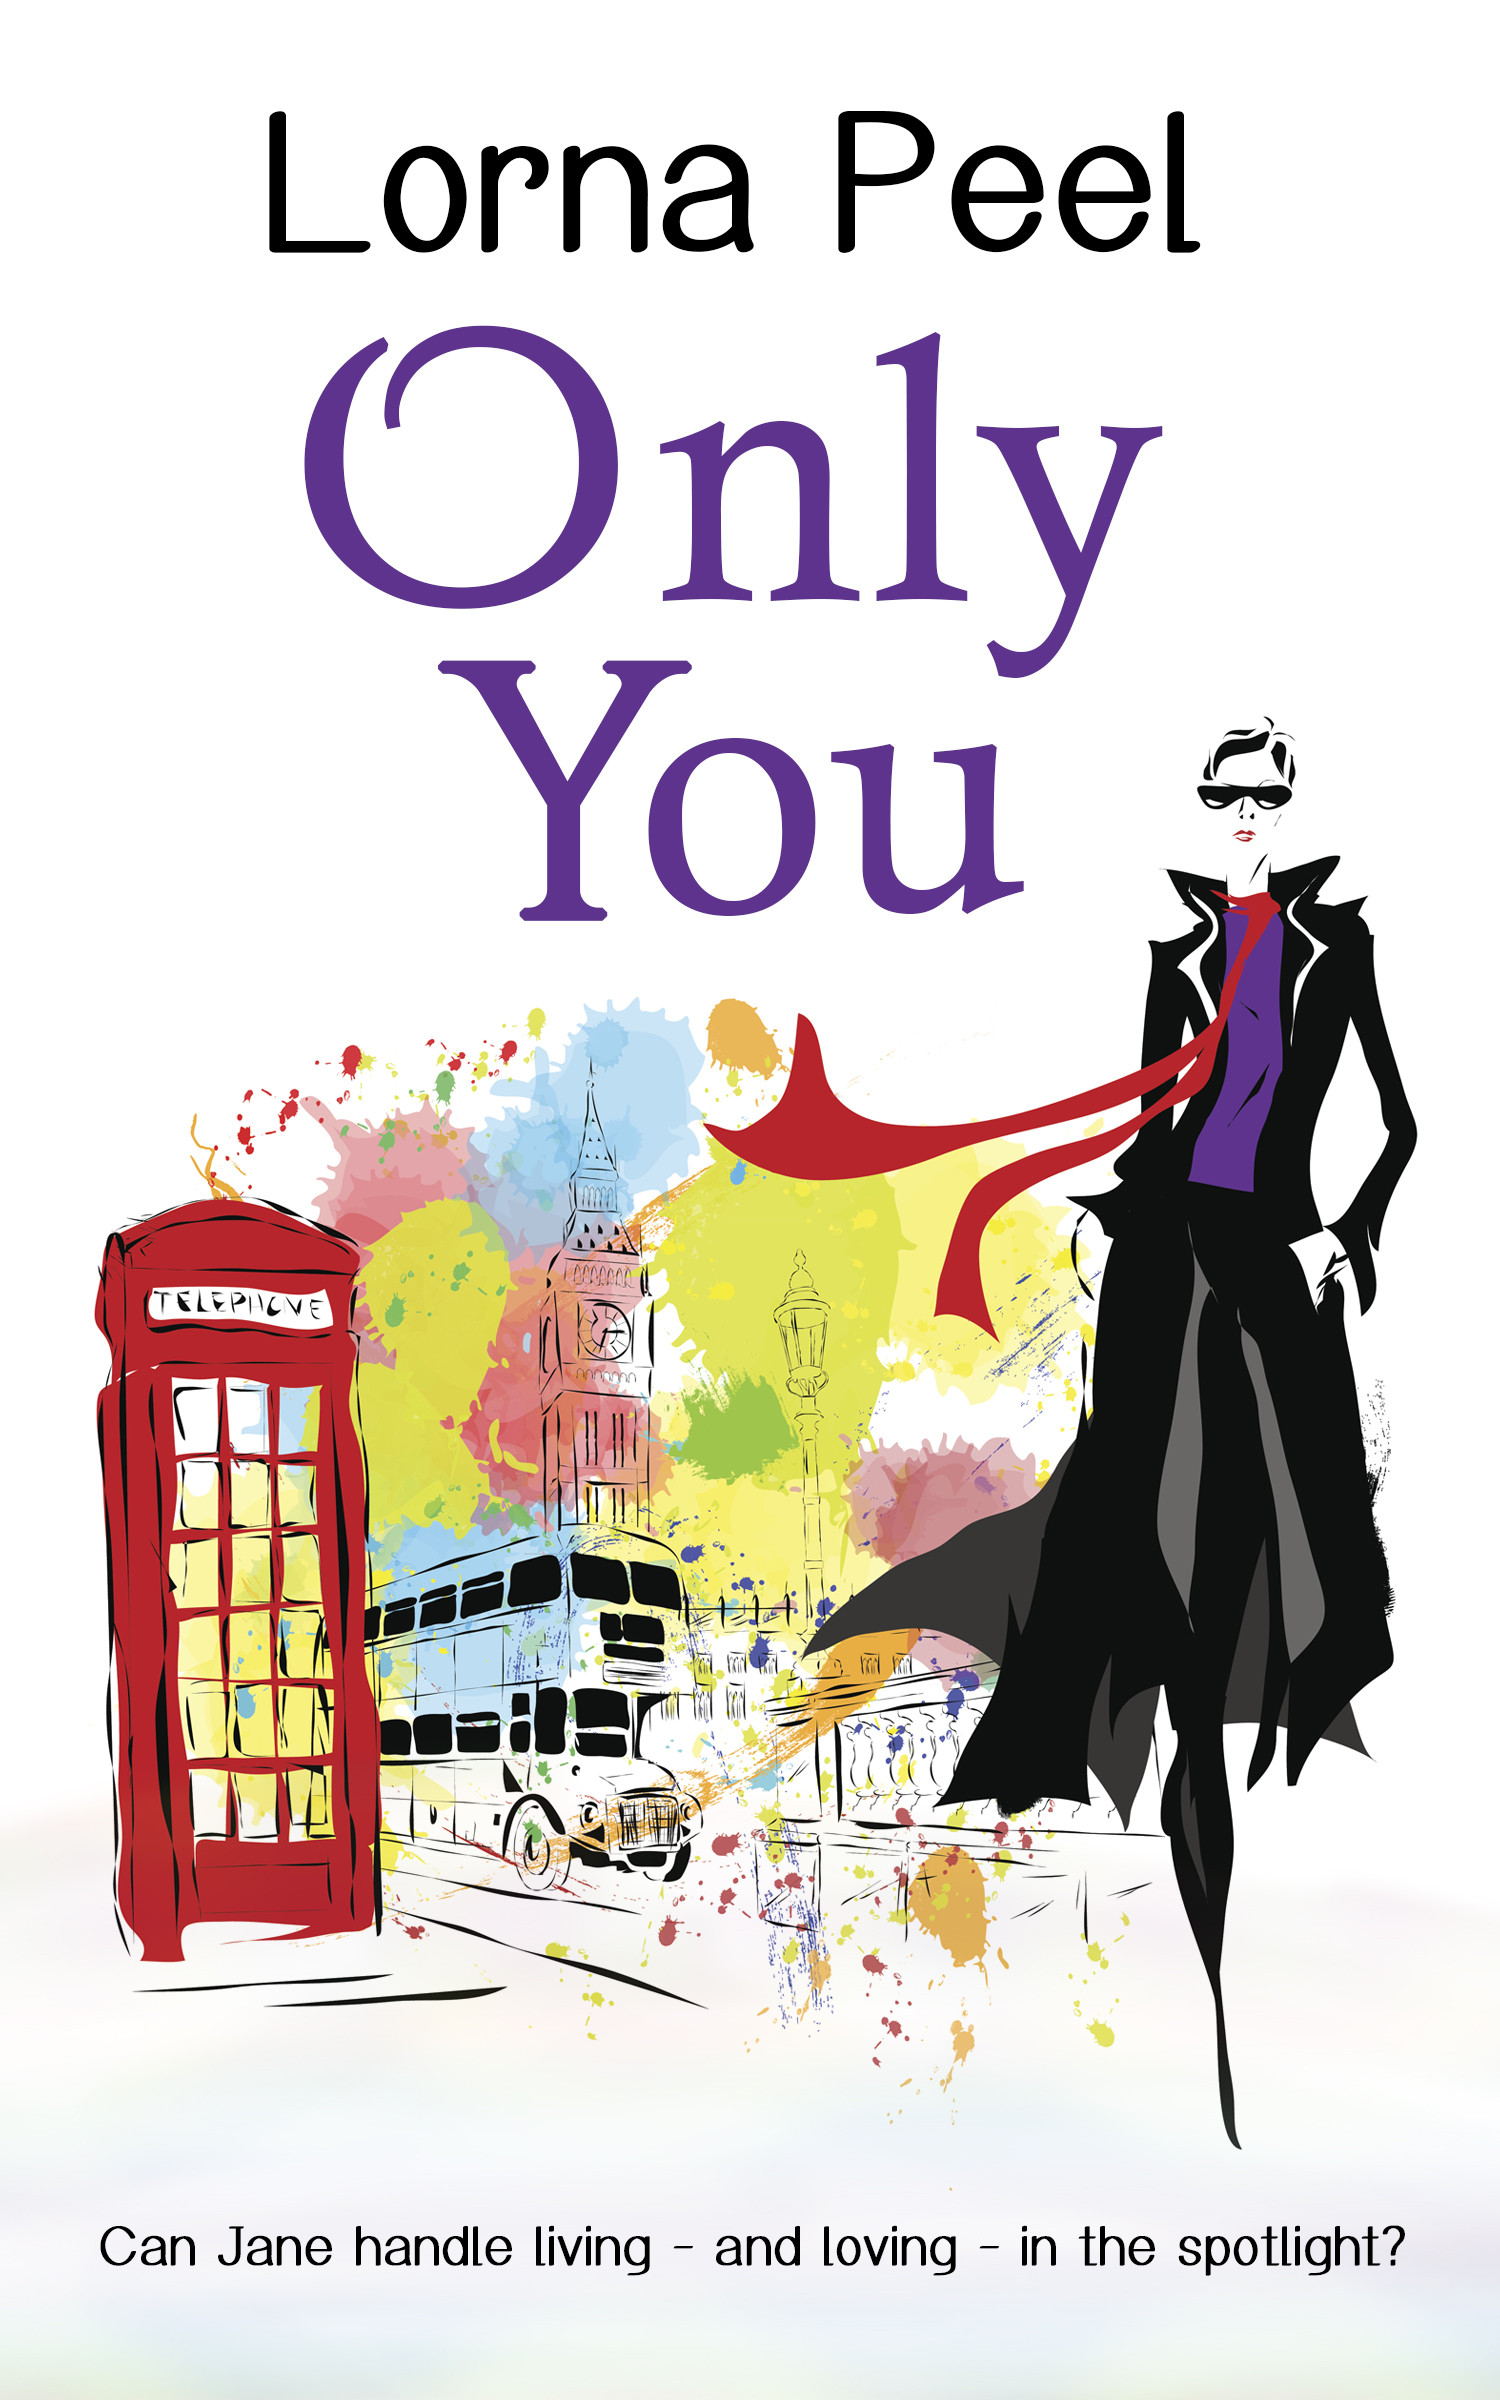 Only You: A British Celebrity Romance